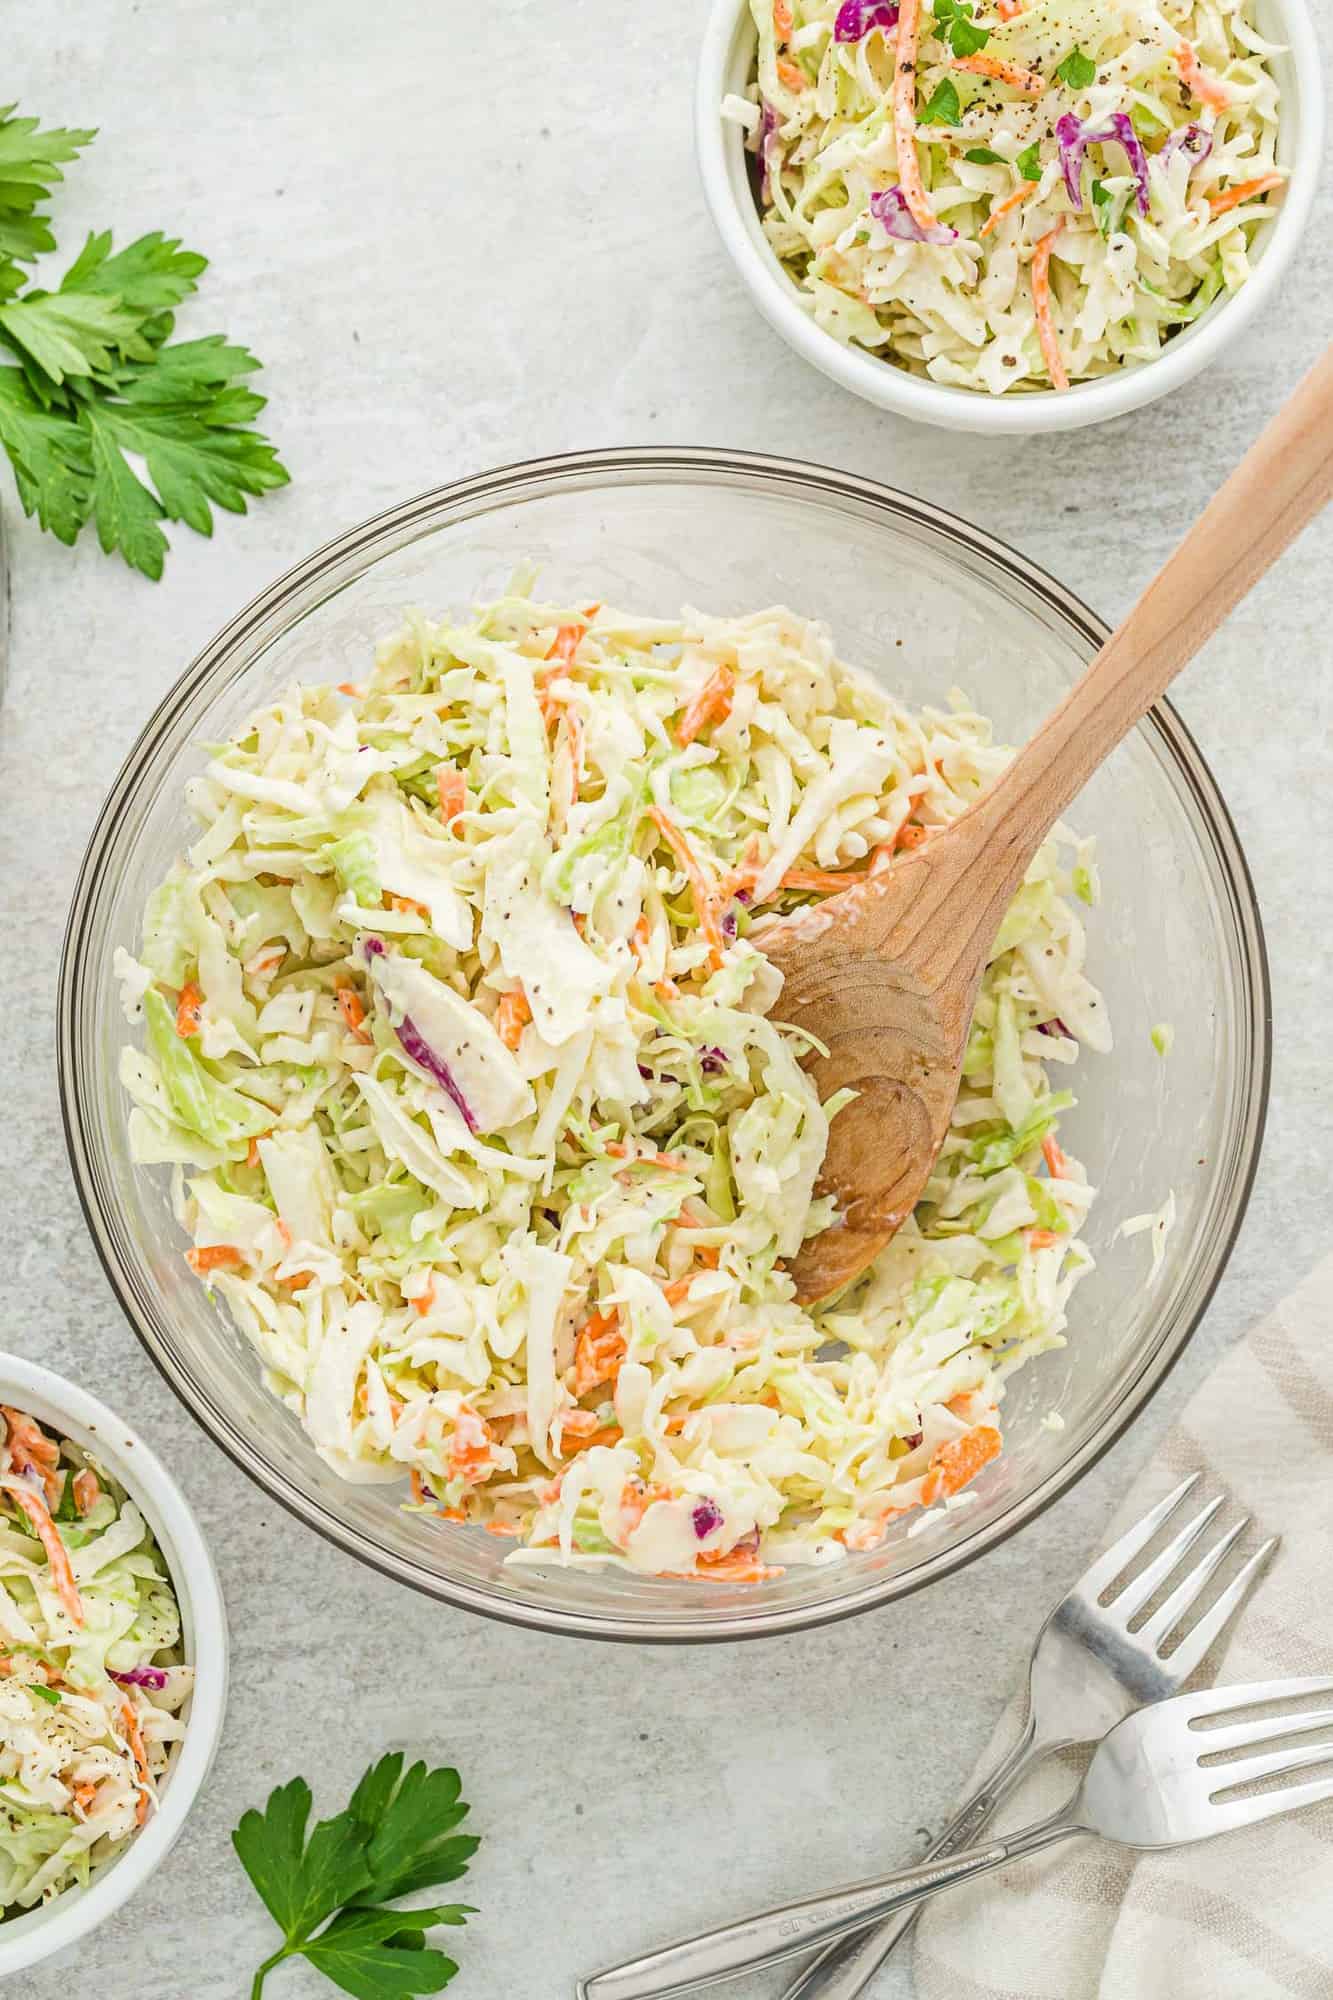 Coleslaw in a large mixing bowl with a wooden spoon.